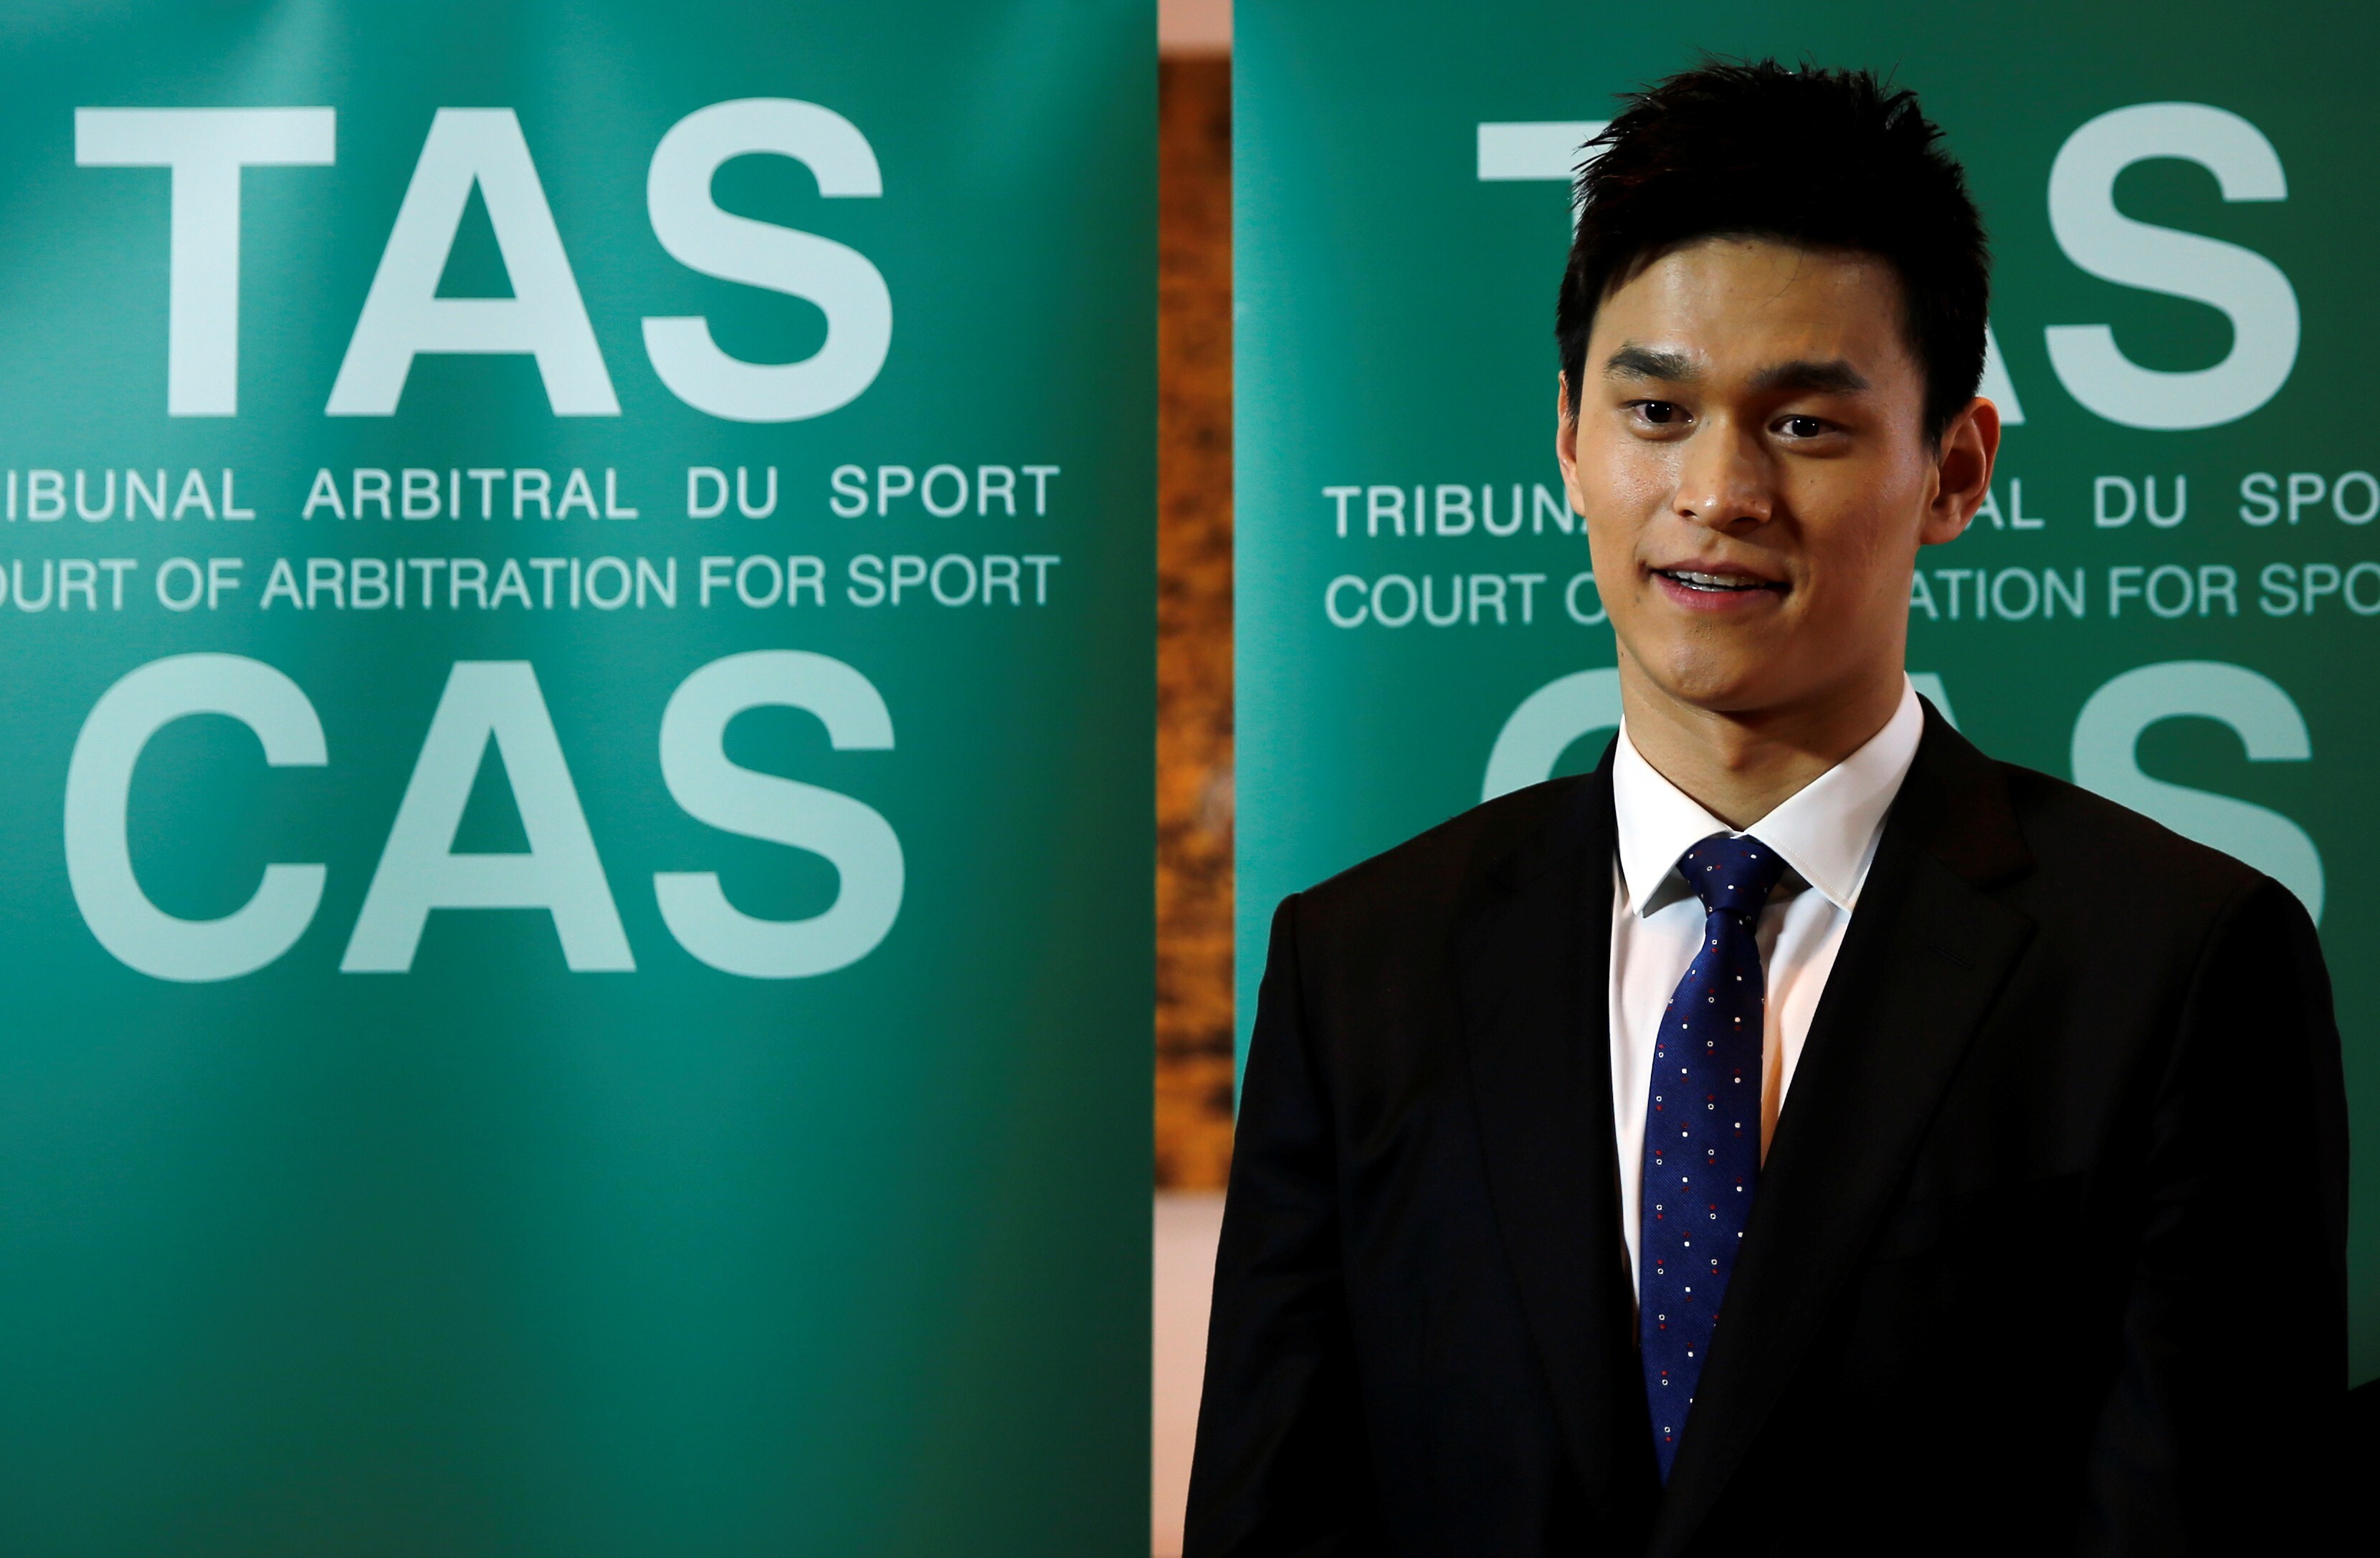 Chinese swimmer Sun Yang poses after a public hearing at the Court of Arbitration for Sport (CAS) for the appeal filed by the World Anti-Doping Agency (Wada) against him and the FINA in November, 2019. Photo: Reuters